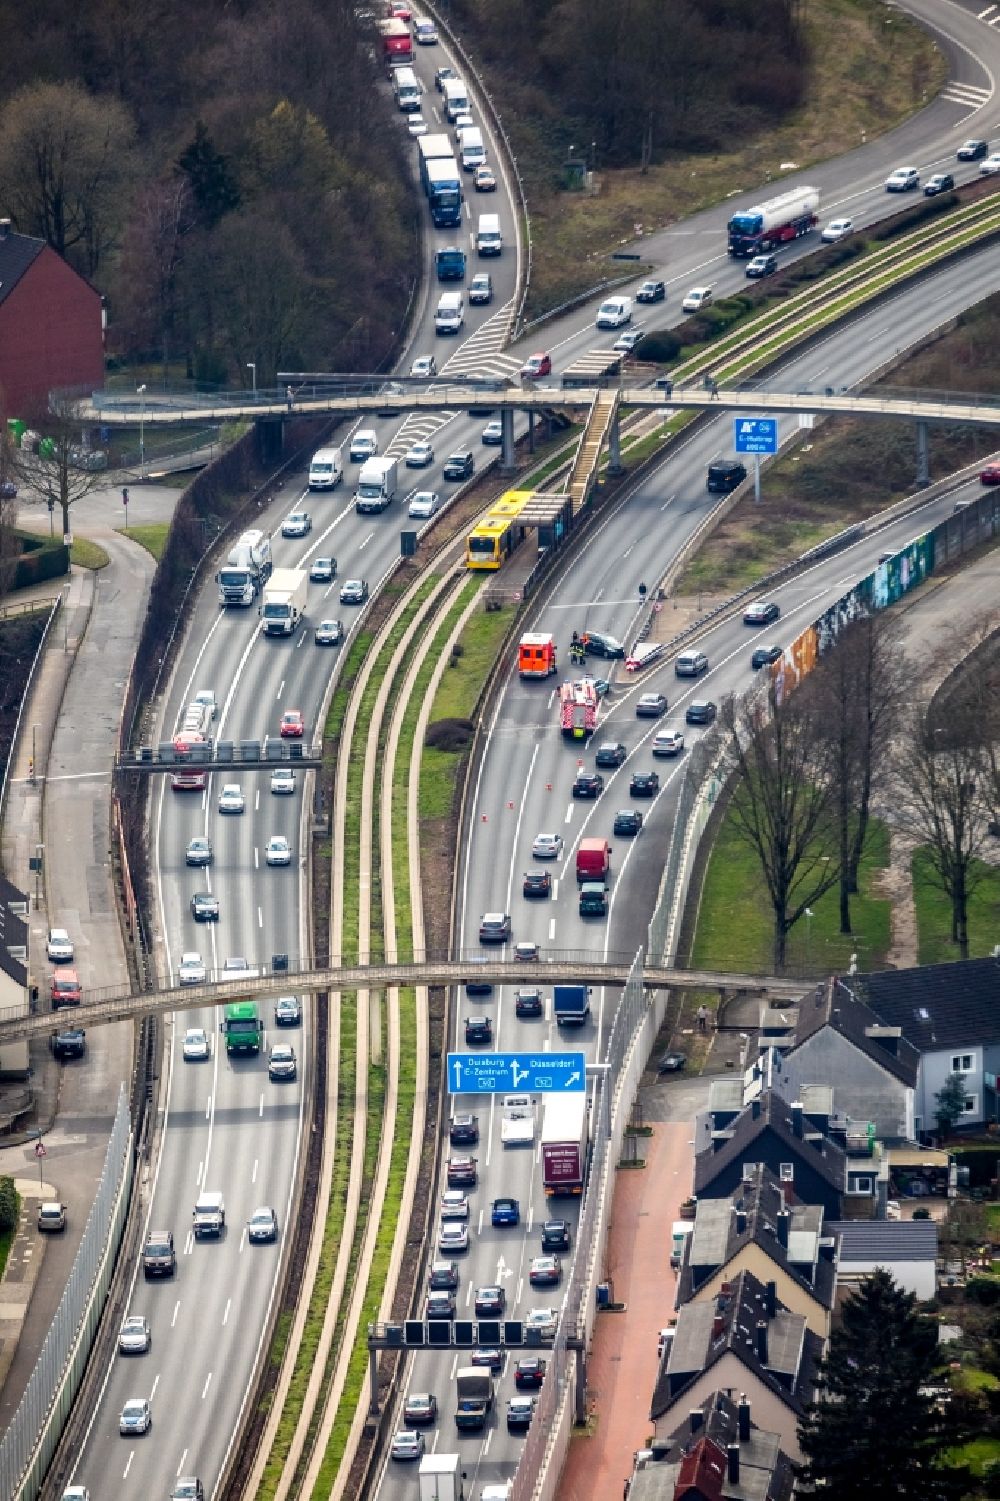 Aerial image Essen - Highway congestion along the route of the lanes BAB A40 - A52 in the district Frillendorf in Essen in the state North Rhine-Westphalia, Germany